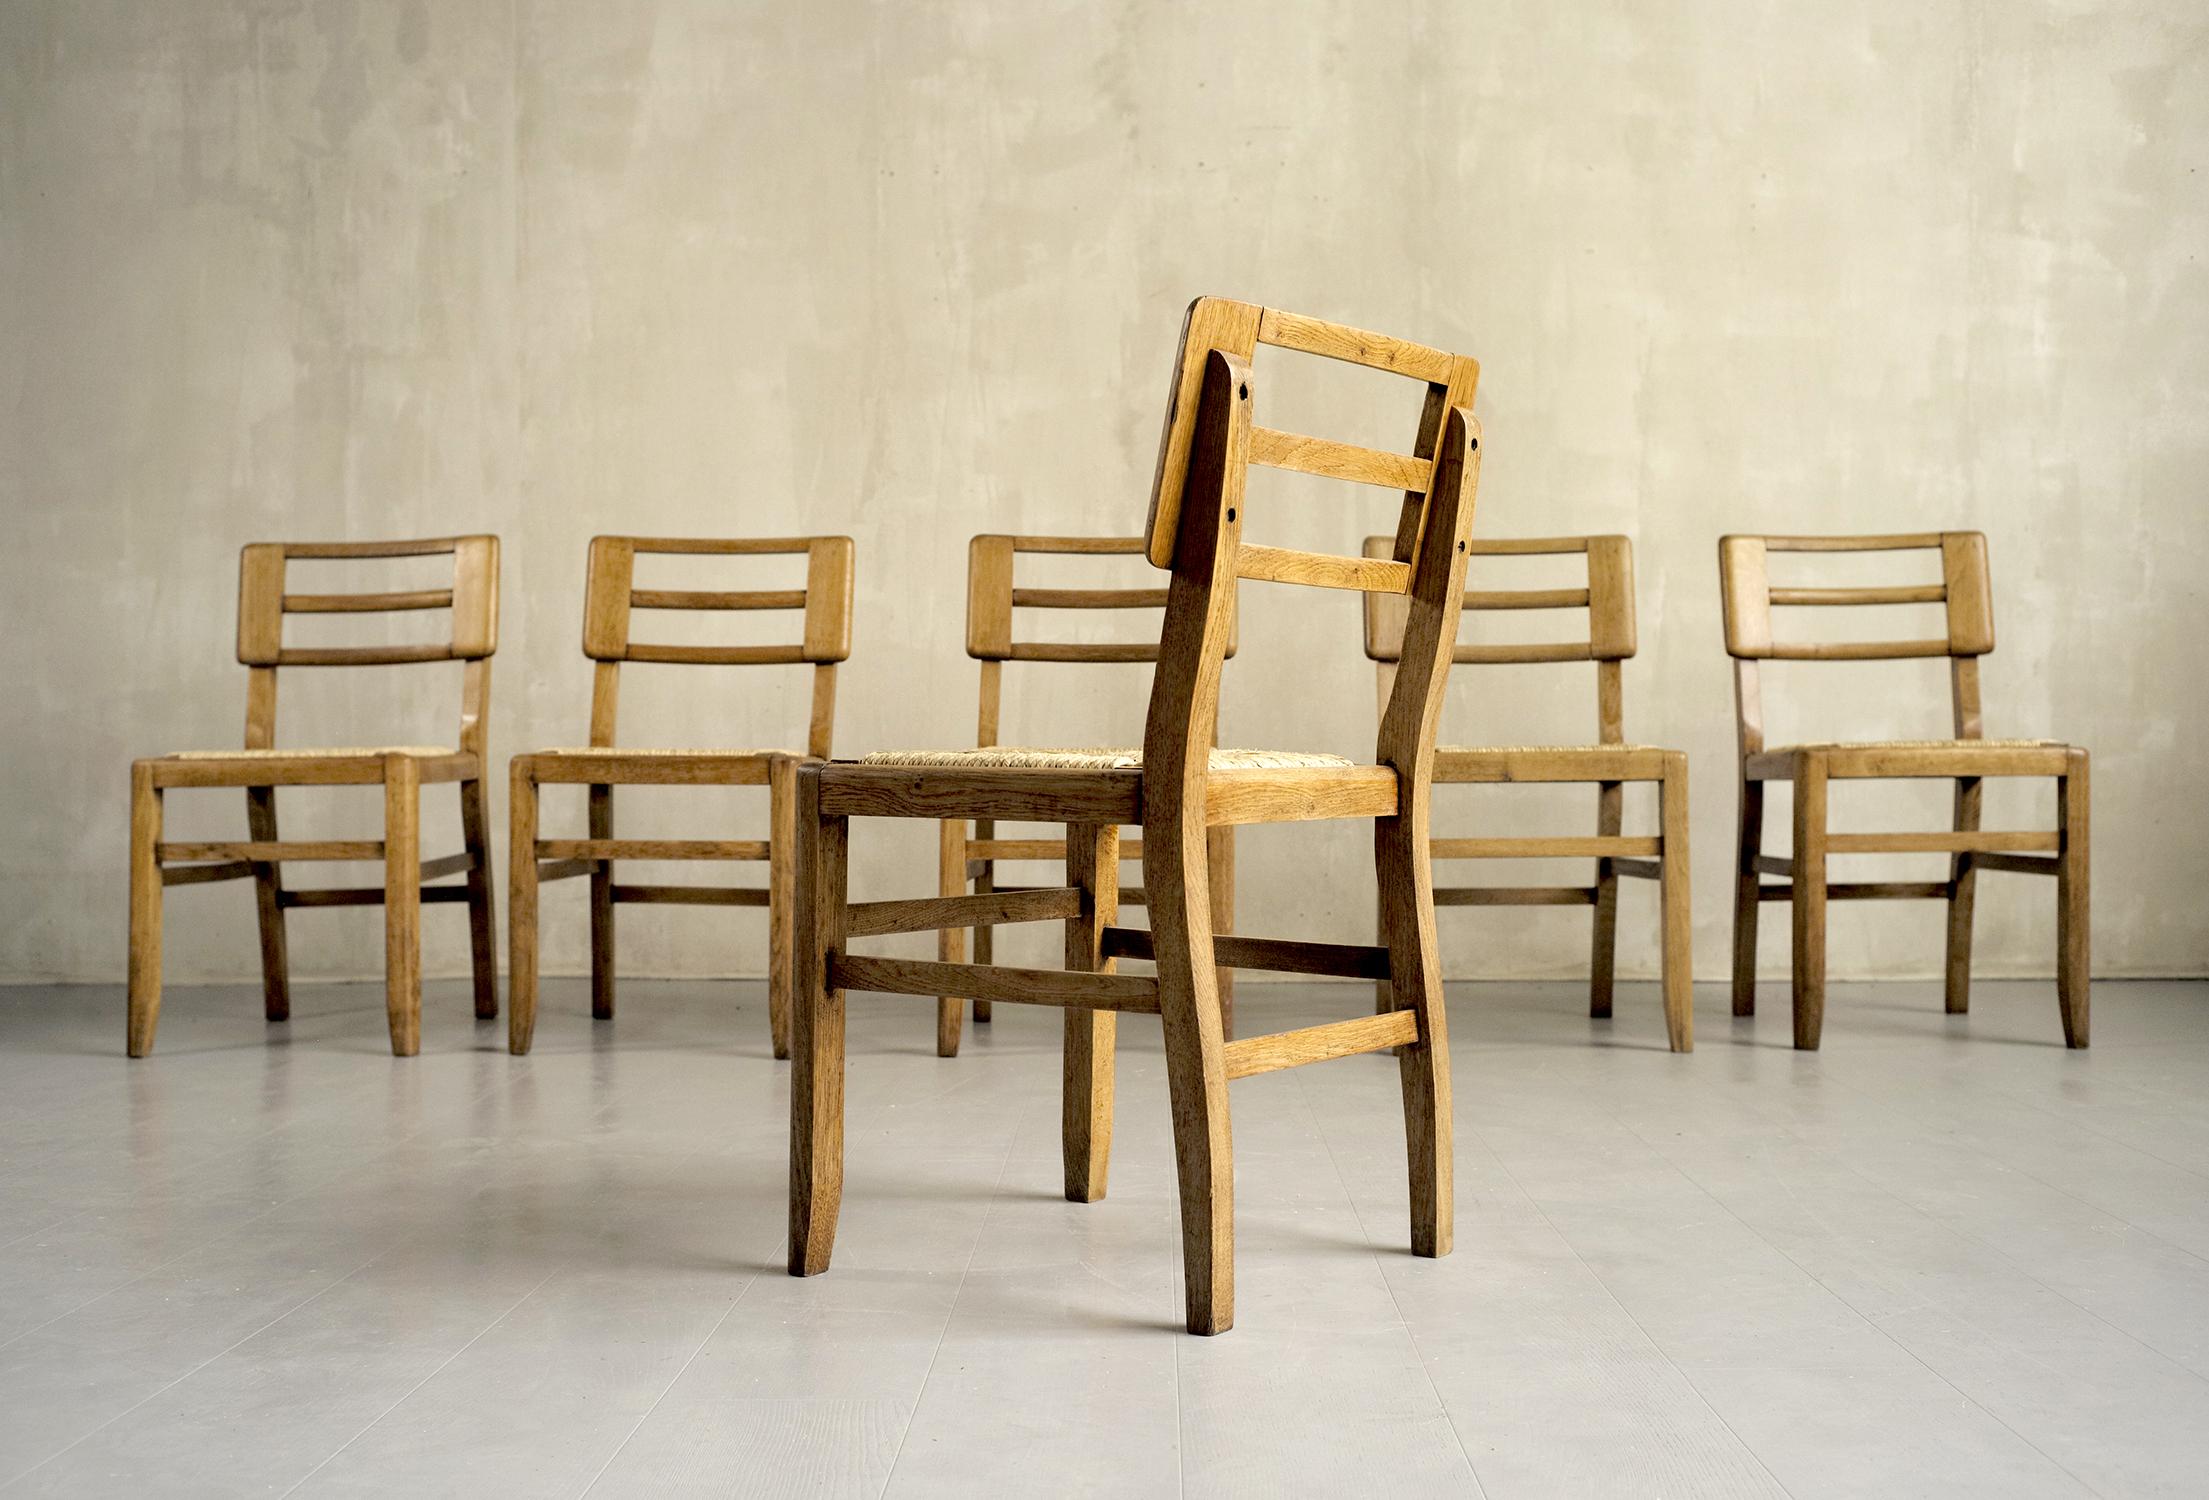 Pierre Cruège, Set of 6 Straw Chairs, France, 1950 For Sale 1